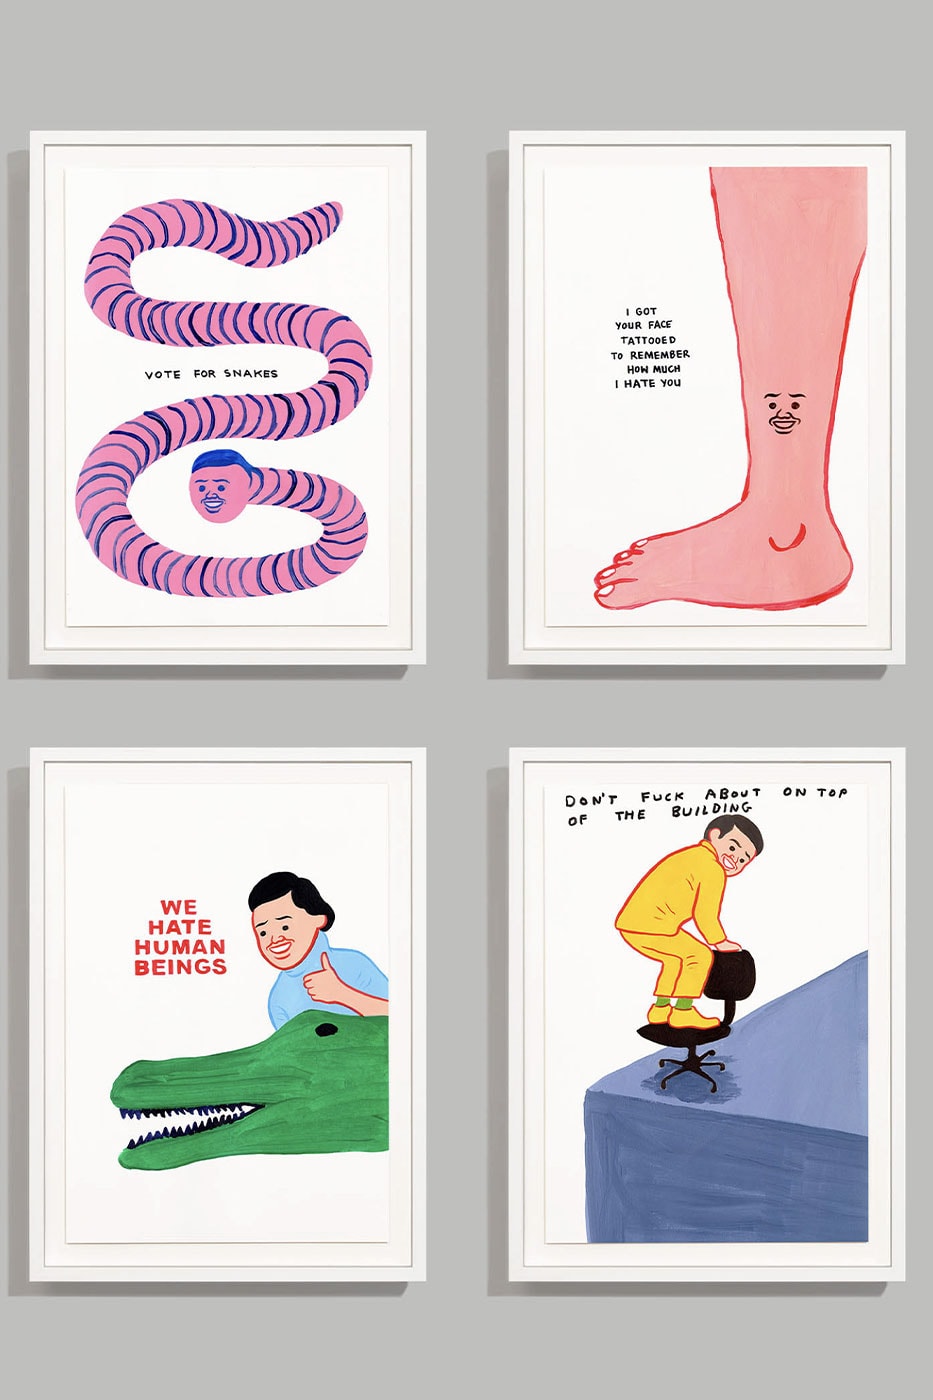 Dark Humor Icons David Shrigley and Joan Cornella Have Unveiled Their Collaborative Project 'VOTE' contemporary art allrightsreserved spanish cartoonist 